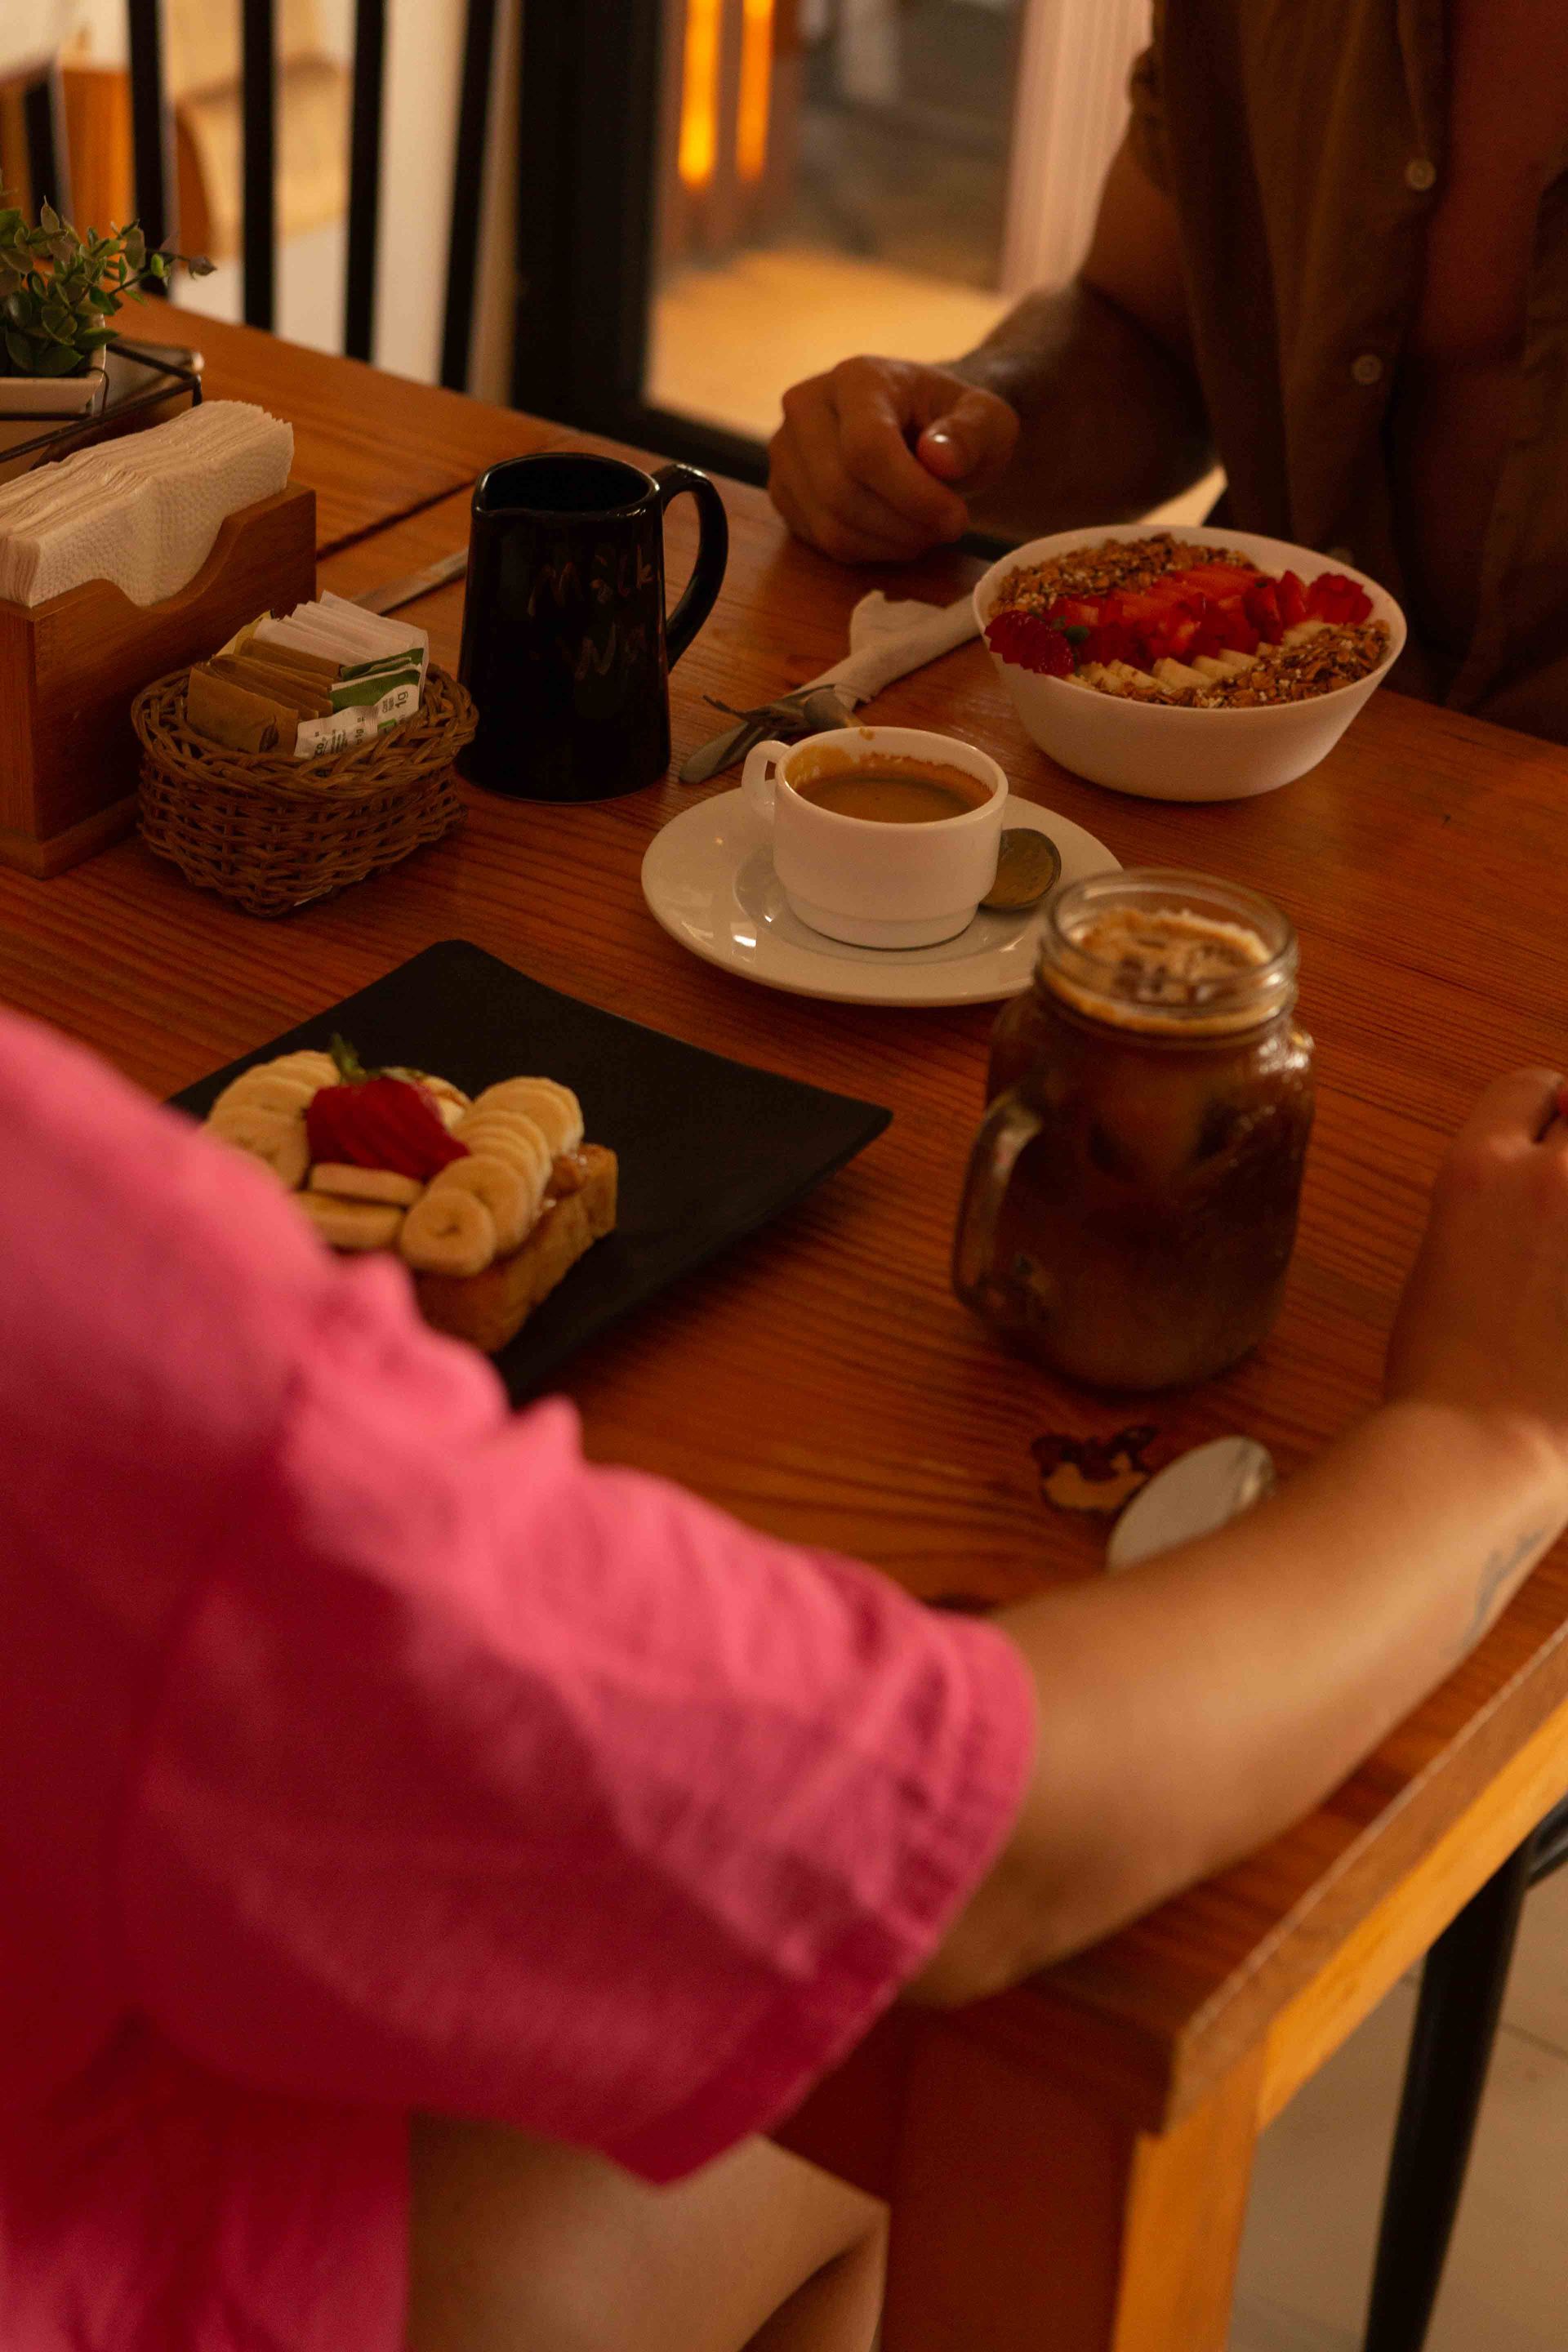 A woman in a pink shirt is sitting at a table with plates of food and a cup of coffee.